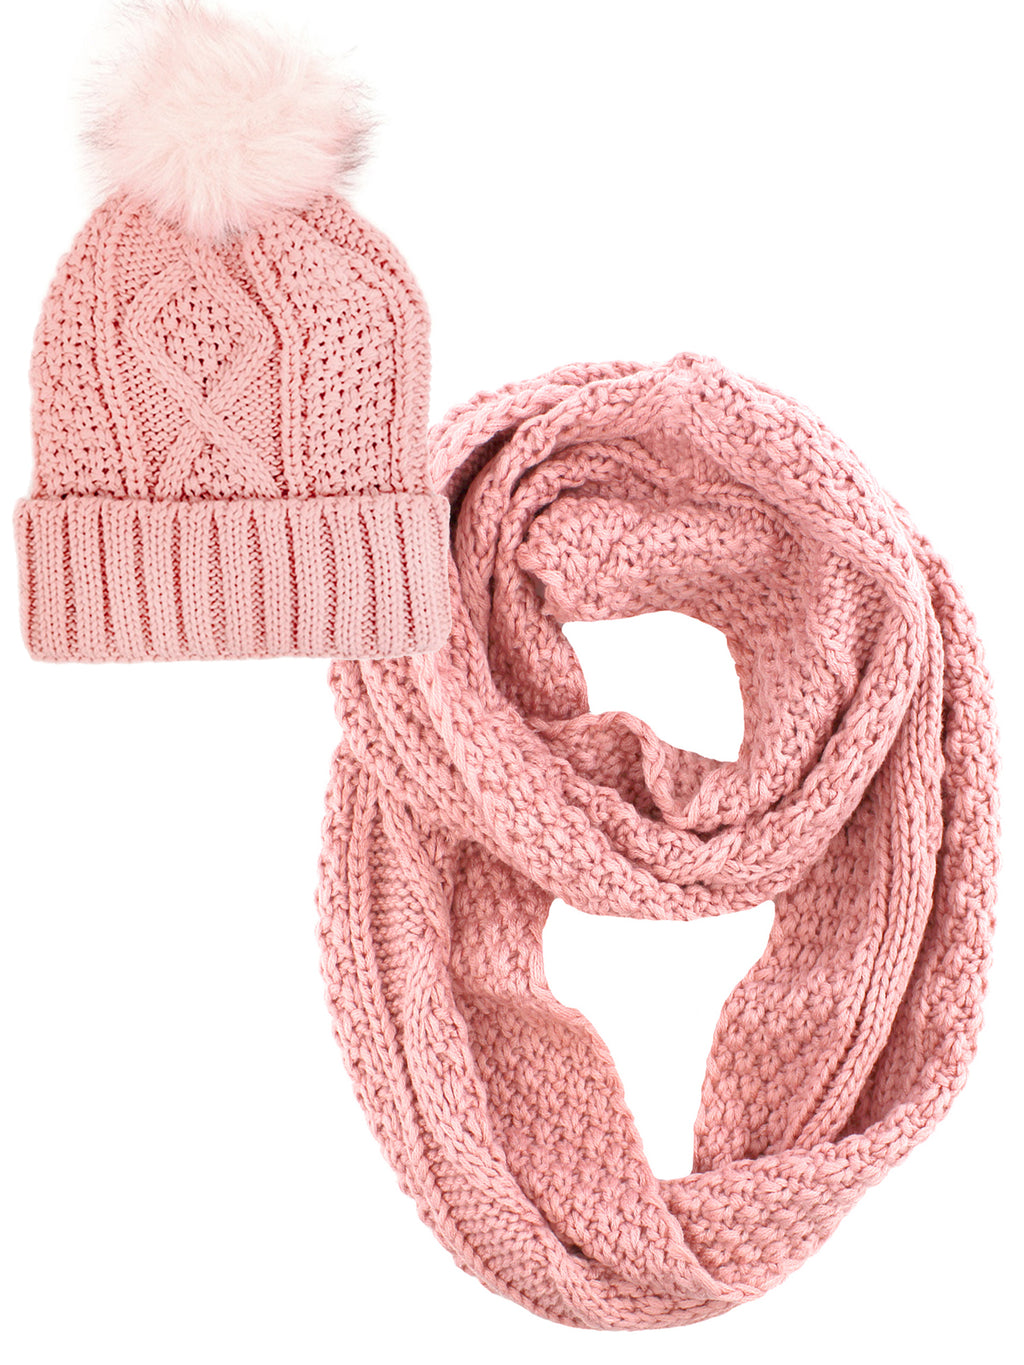 Knit Circle Scarf And Hat Set With Fur Pom Pom